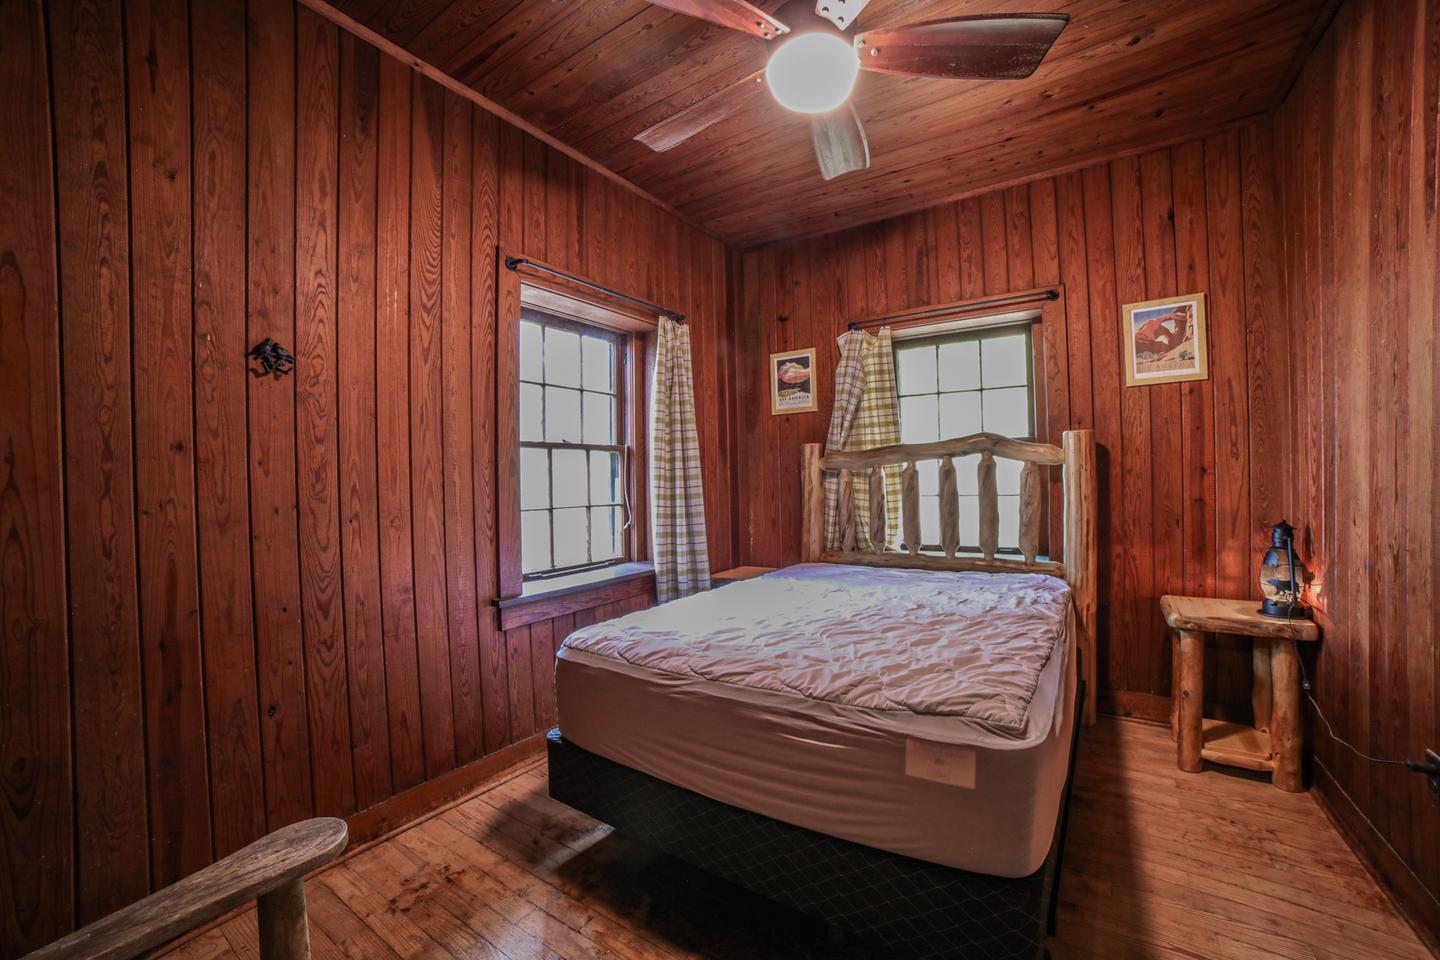 White Rock Mountain, Lodge Bedroom 1Bedroom 1 currently has one Queen sized bed. Attached is one 1/2 bath and one shower room with two showers.